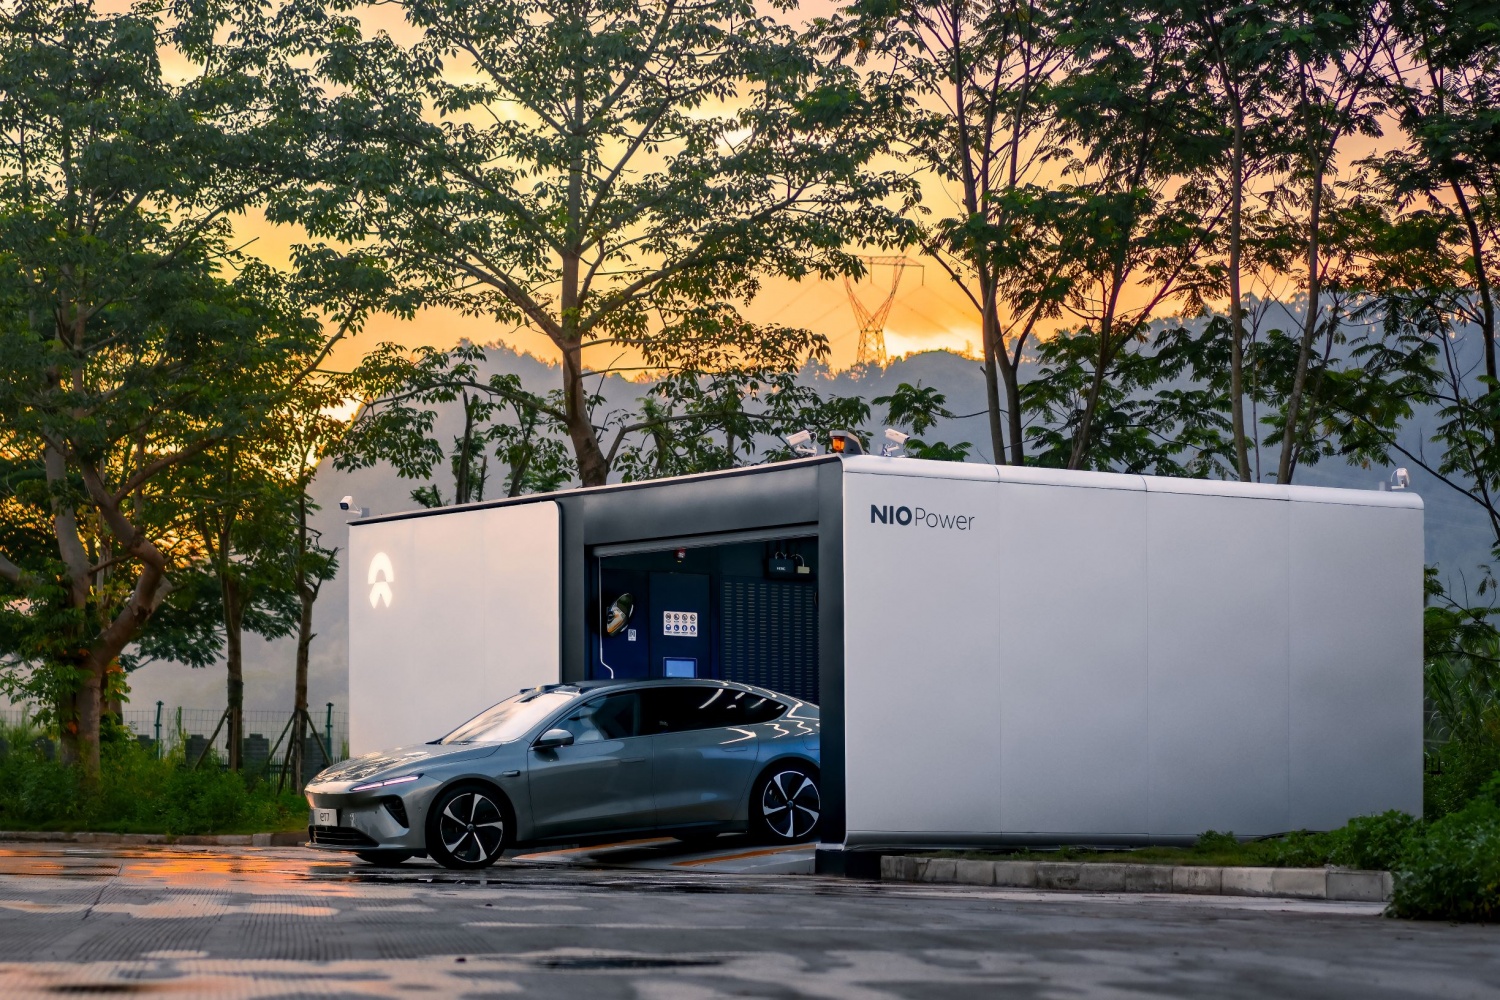 10 Billion Kilometers of Driving Reveals NIO’s Users Preference in Battery Swapping